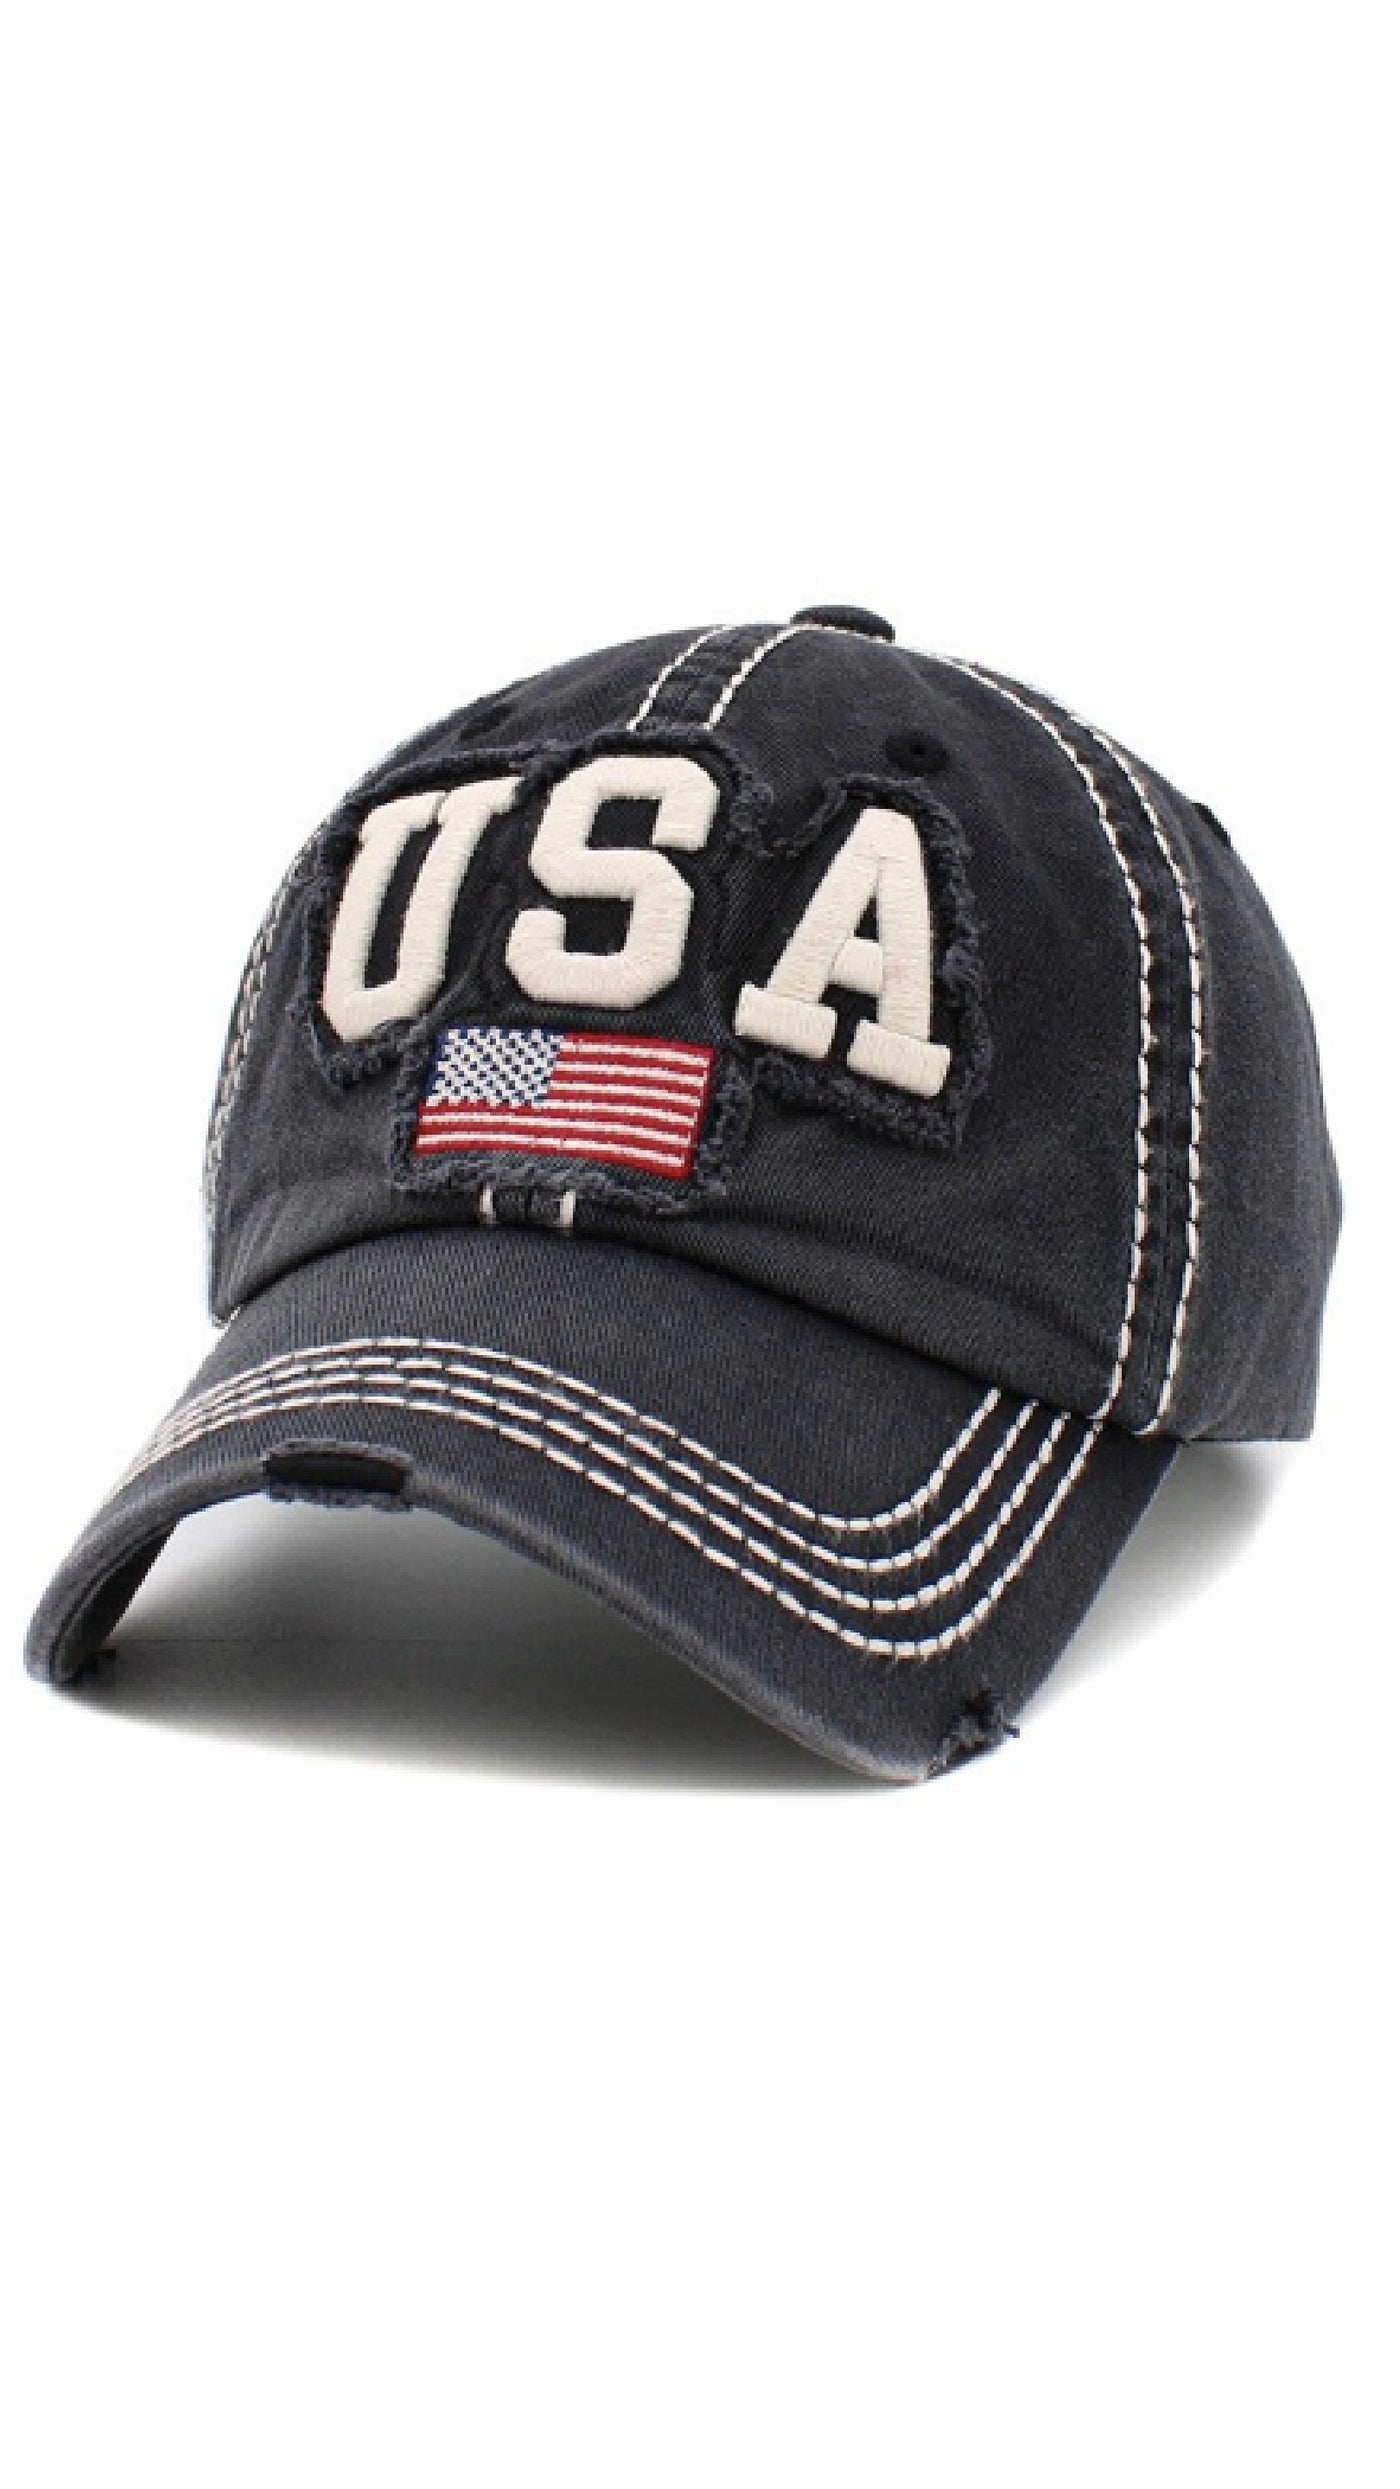 Team USA Hat - Black - Piper and Hollow Boutique